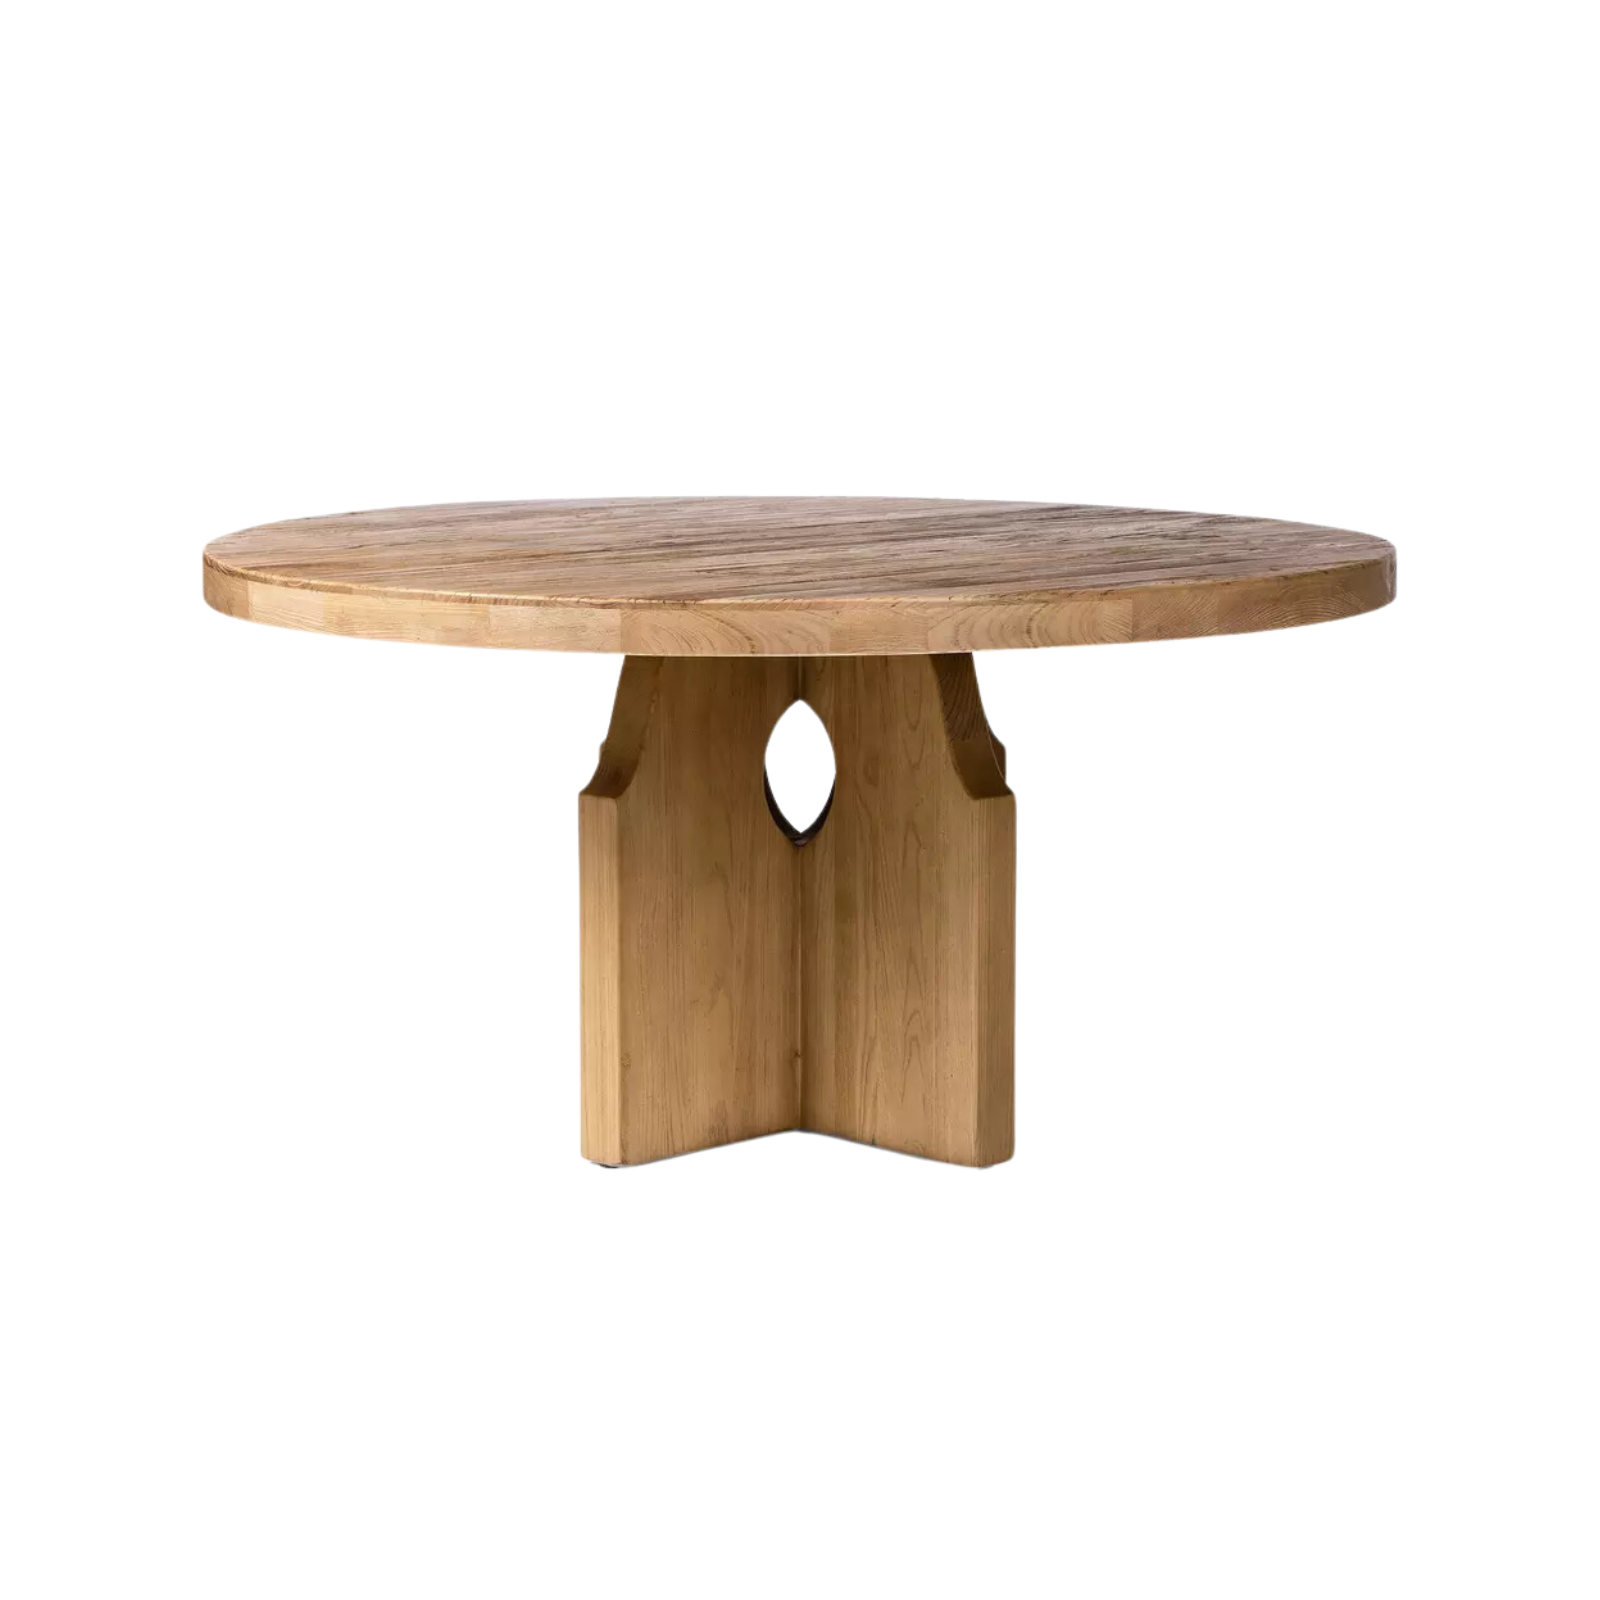 Allan Round Dining Table - Rug & Weave